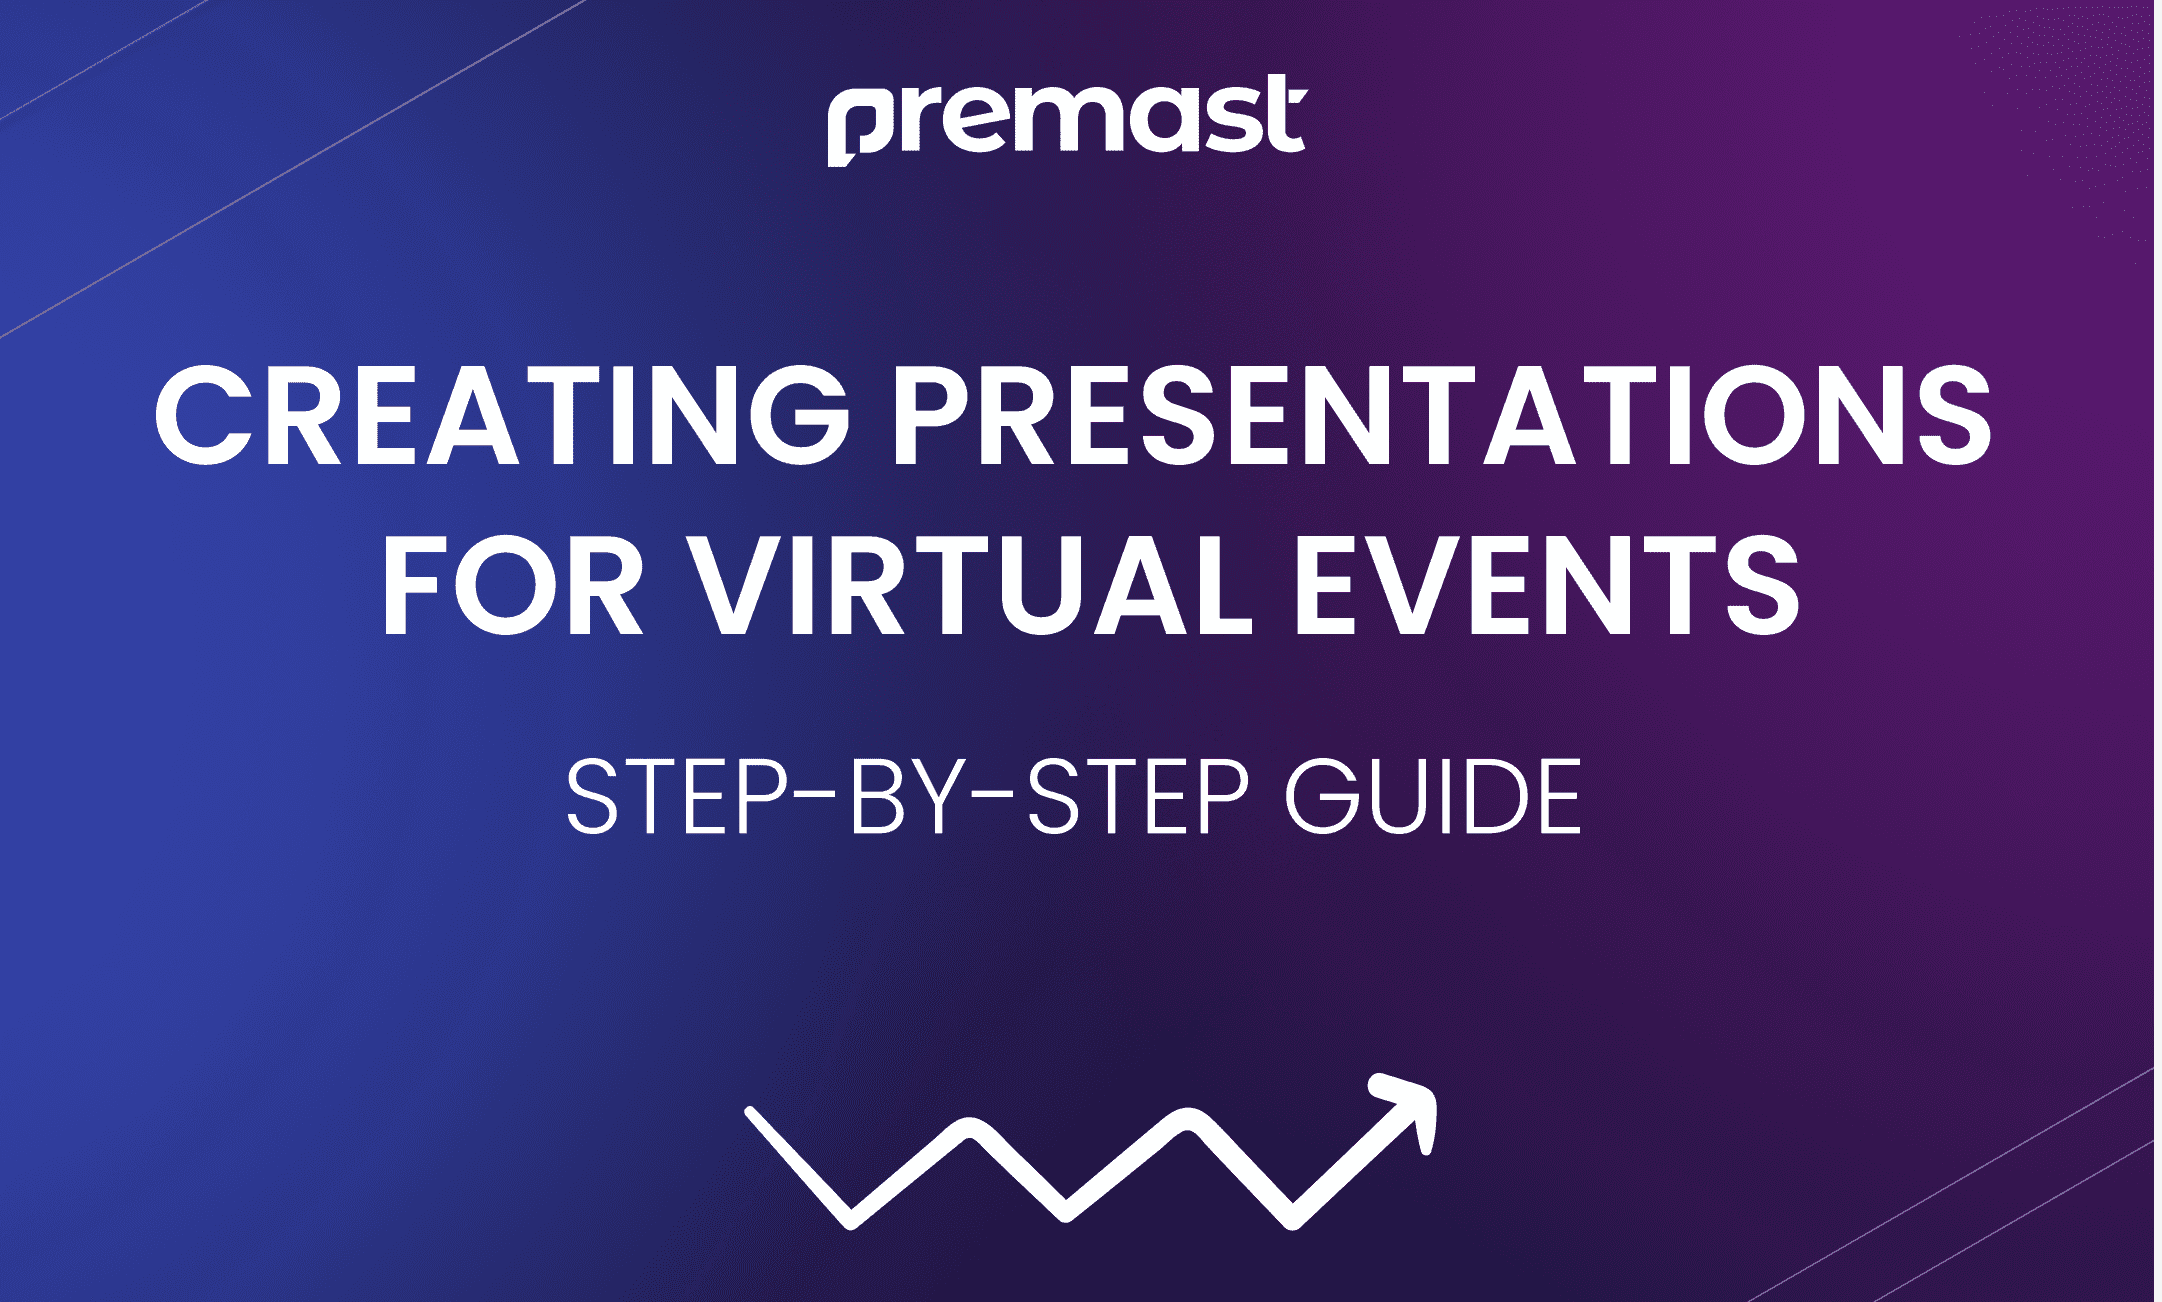 From Boring to Brilliant: A 2023 Guide for Crafting Powerful Virtual Presentations 👏